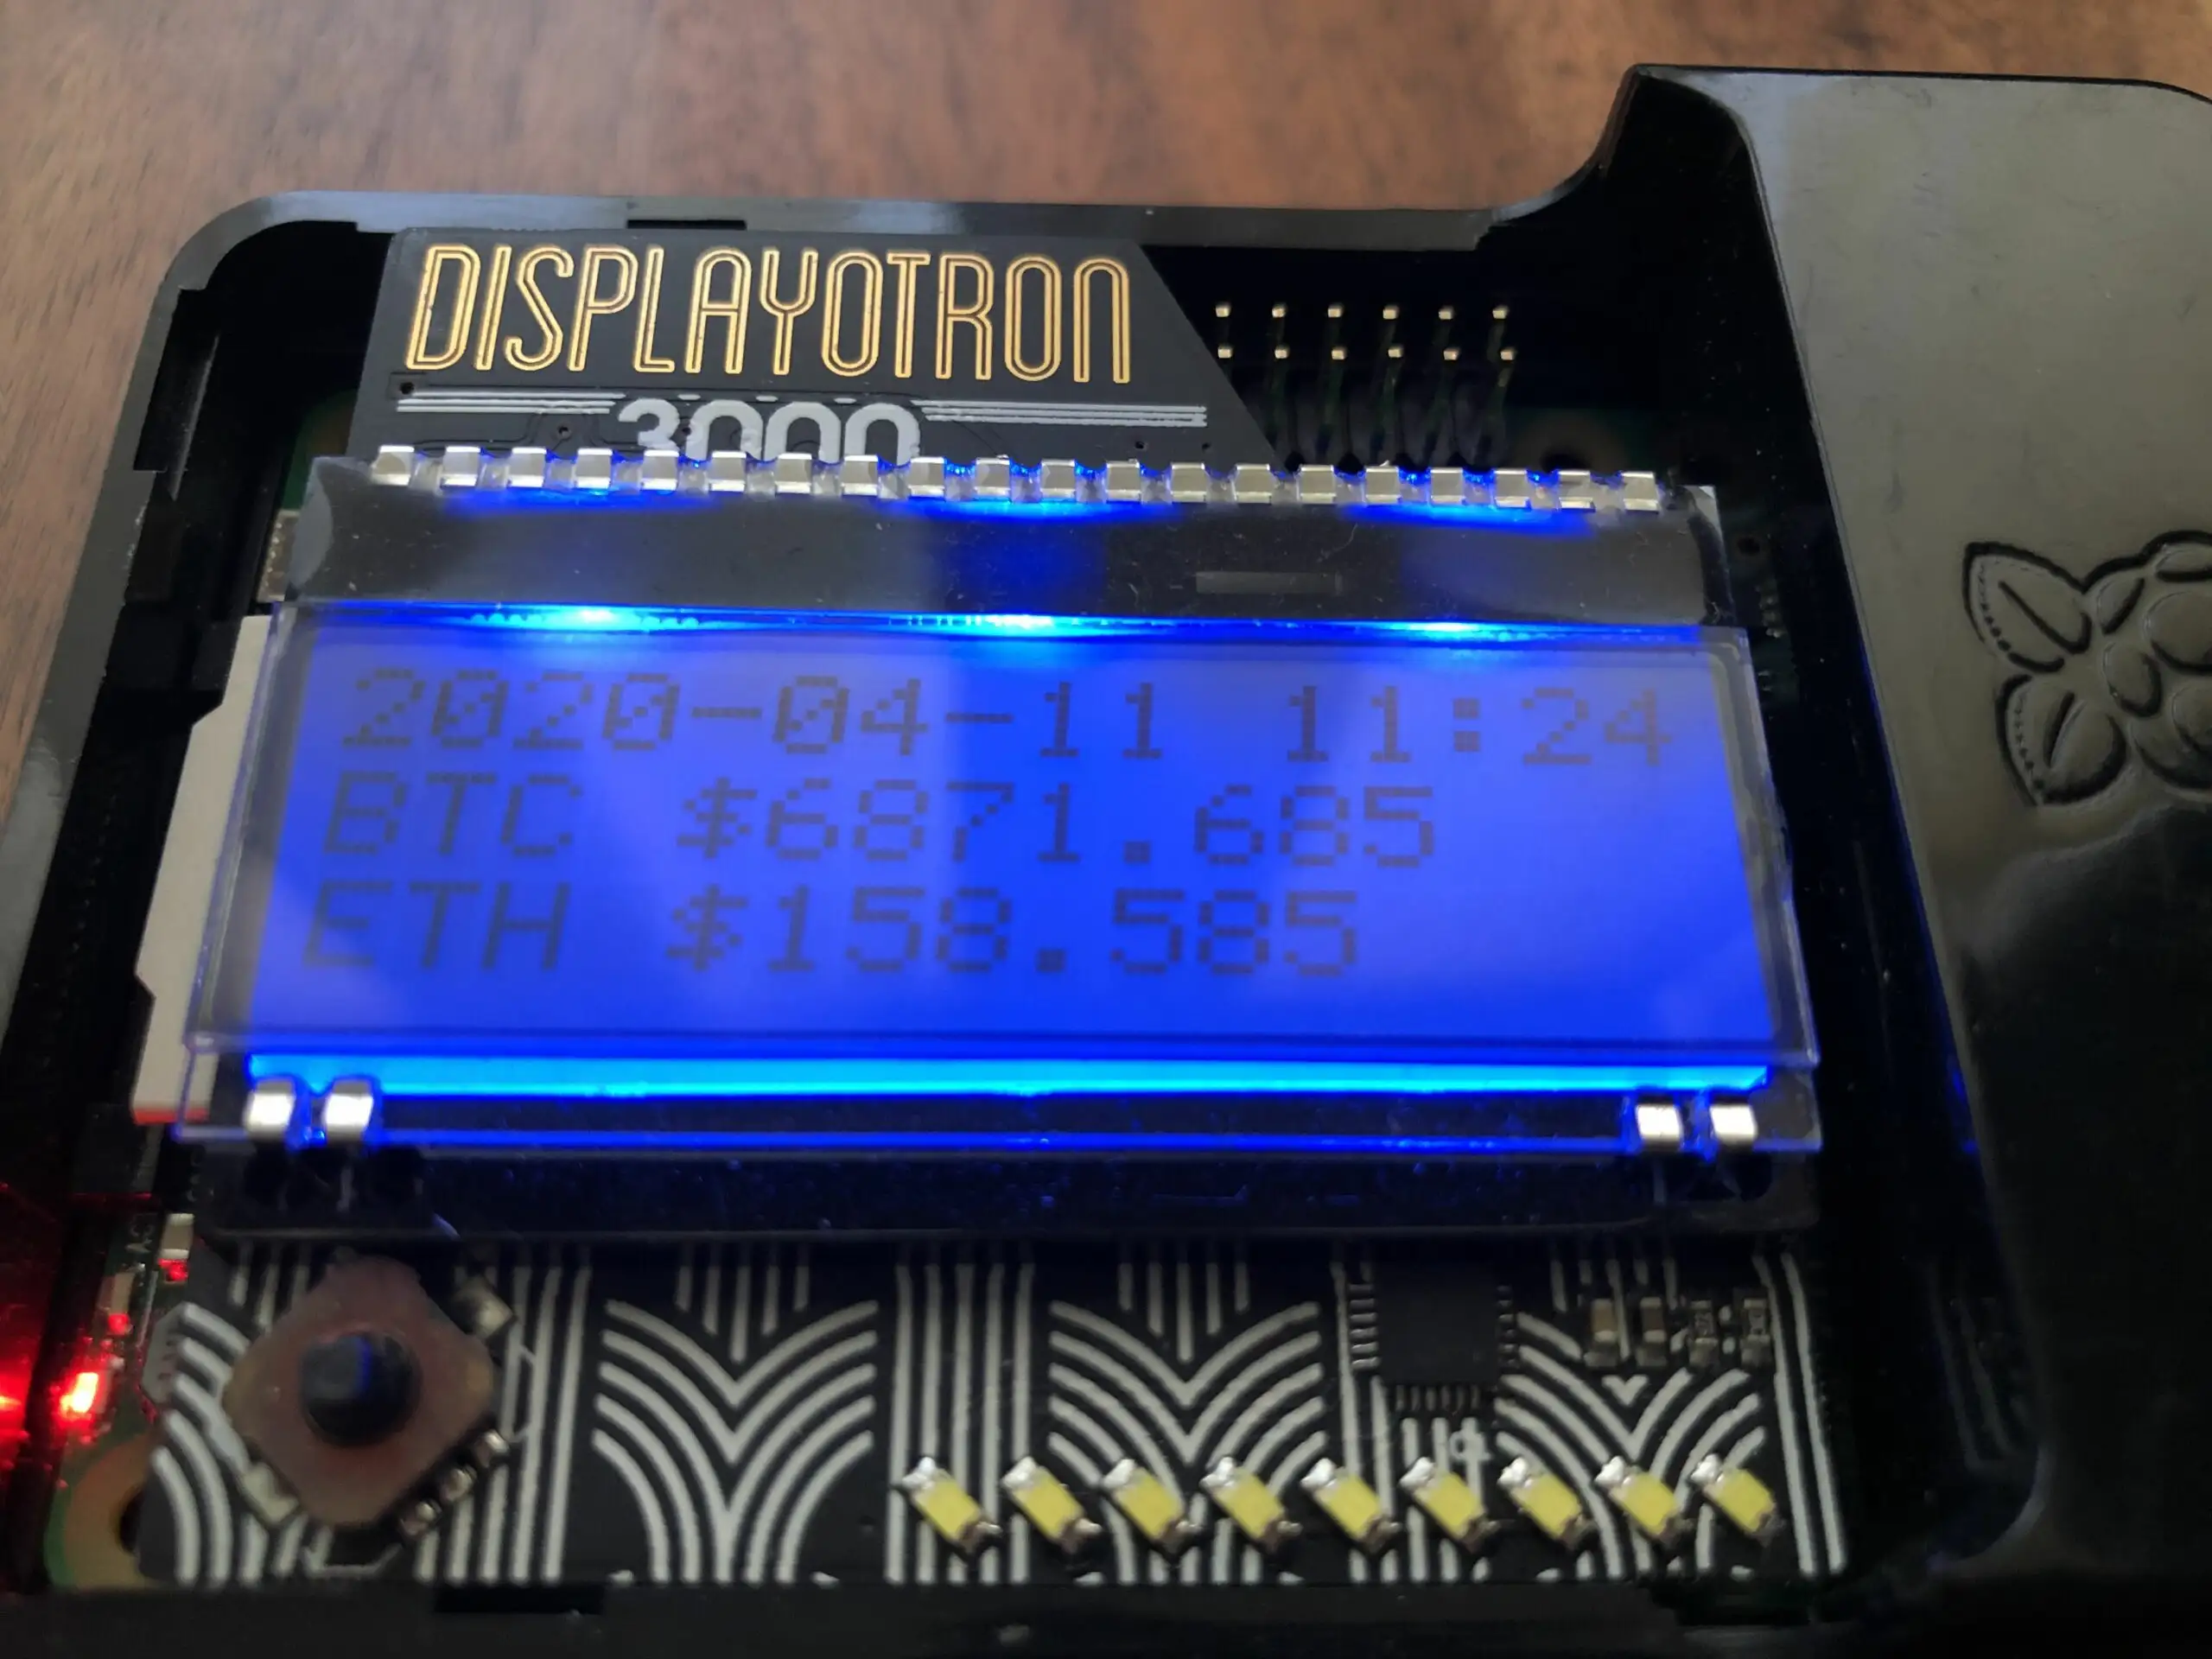 Bitcoin And Ethereum price Ticker using Raspberry Pi and Display-O-Tron